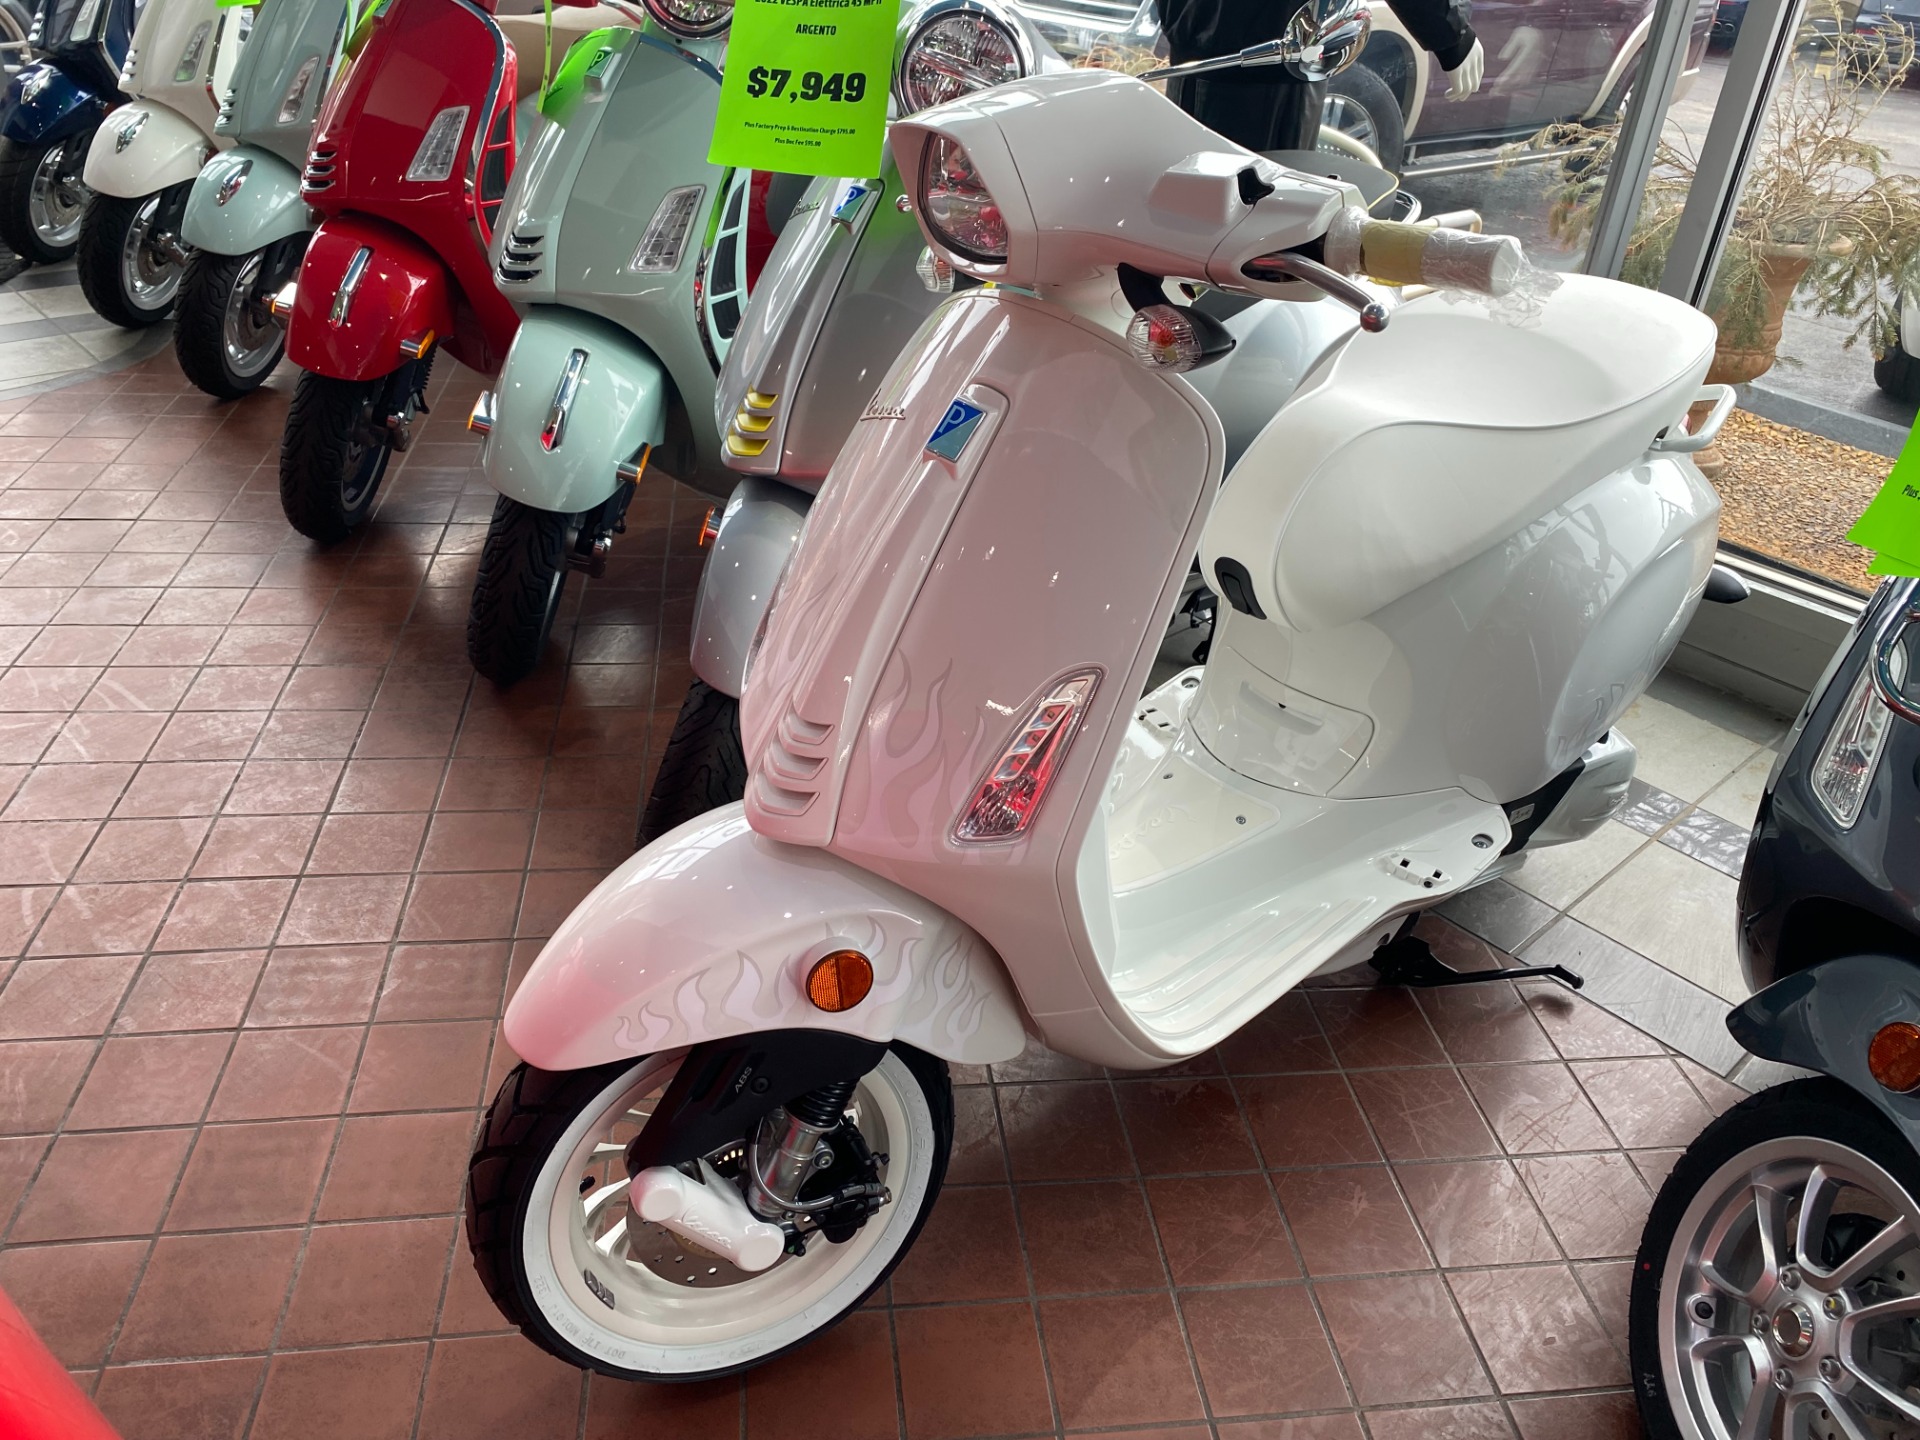 Justin Bieber x Vespa: Up Close With The All-White, Limited-Edition Scooter